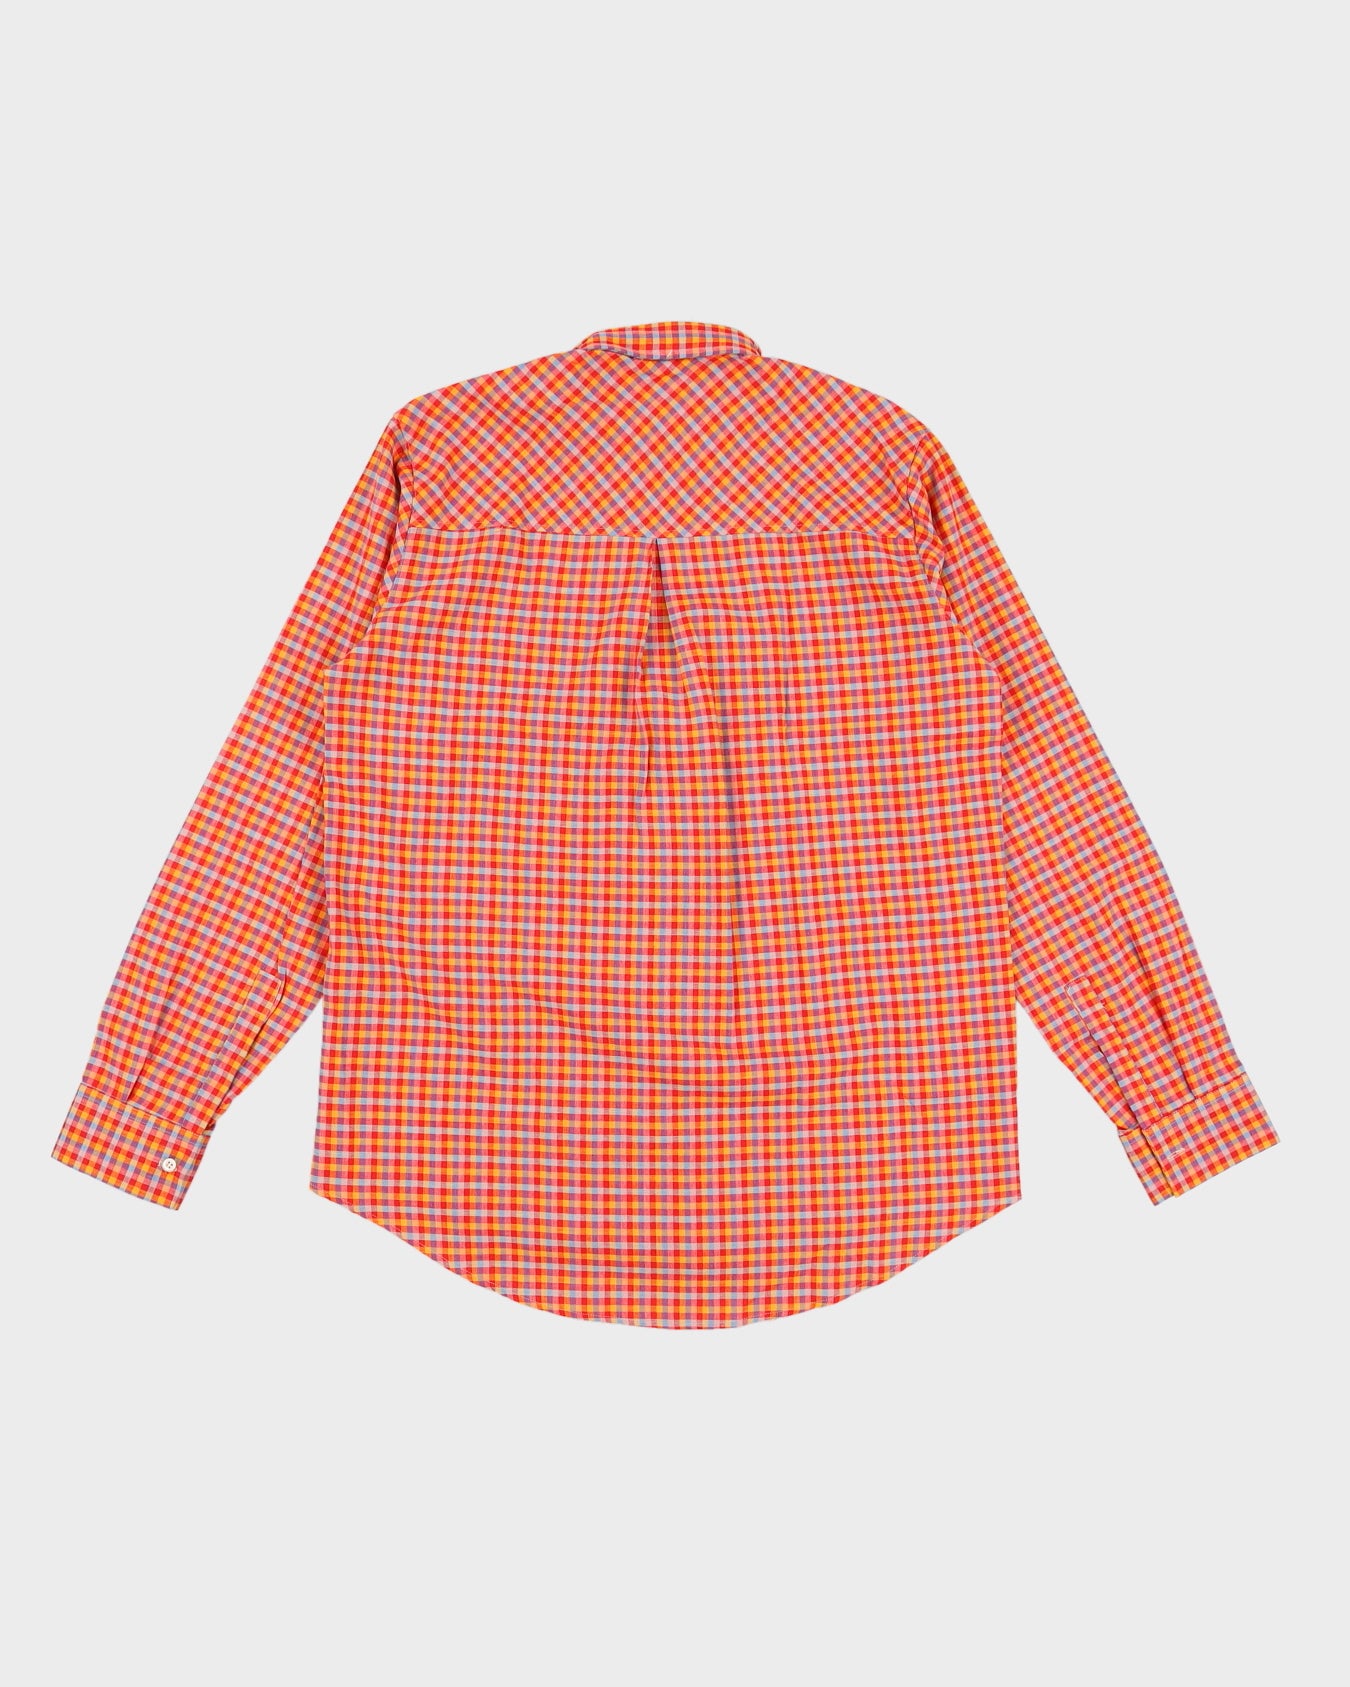 Vintage 70s Benetton Red / Orange Checked Long Sleeved Shirt Deadstock With Tags - L